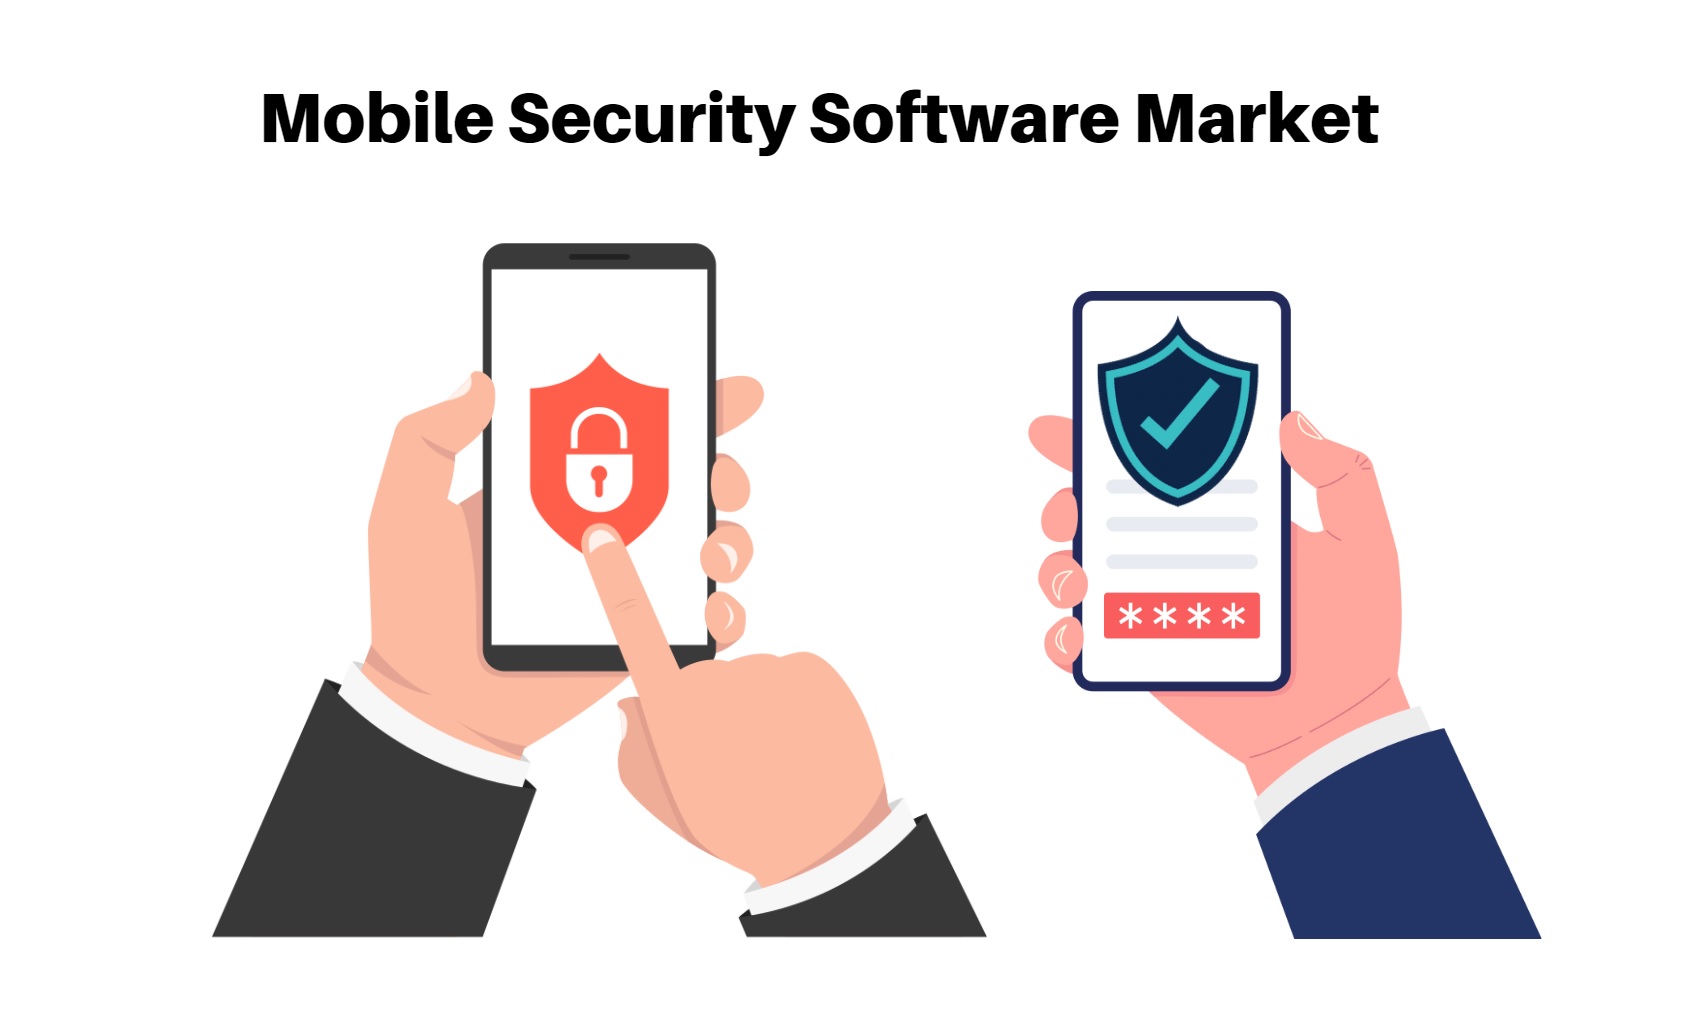 Mobile Security Software Market is poised to grow at a CAGR of 10.7% by 2032